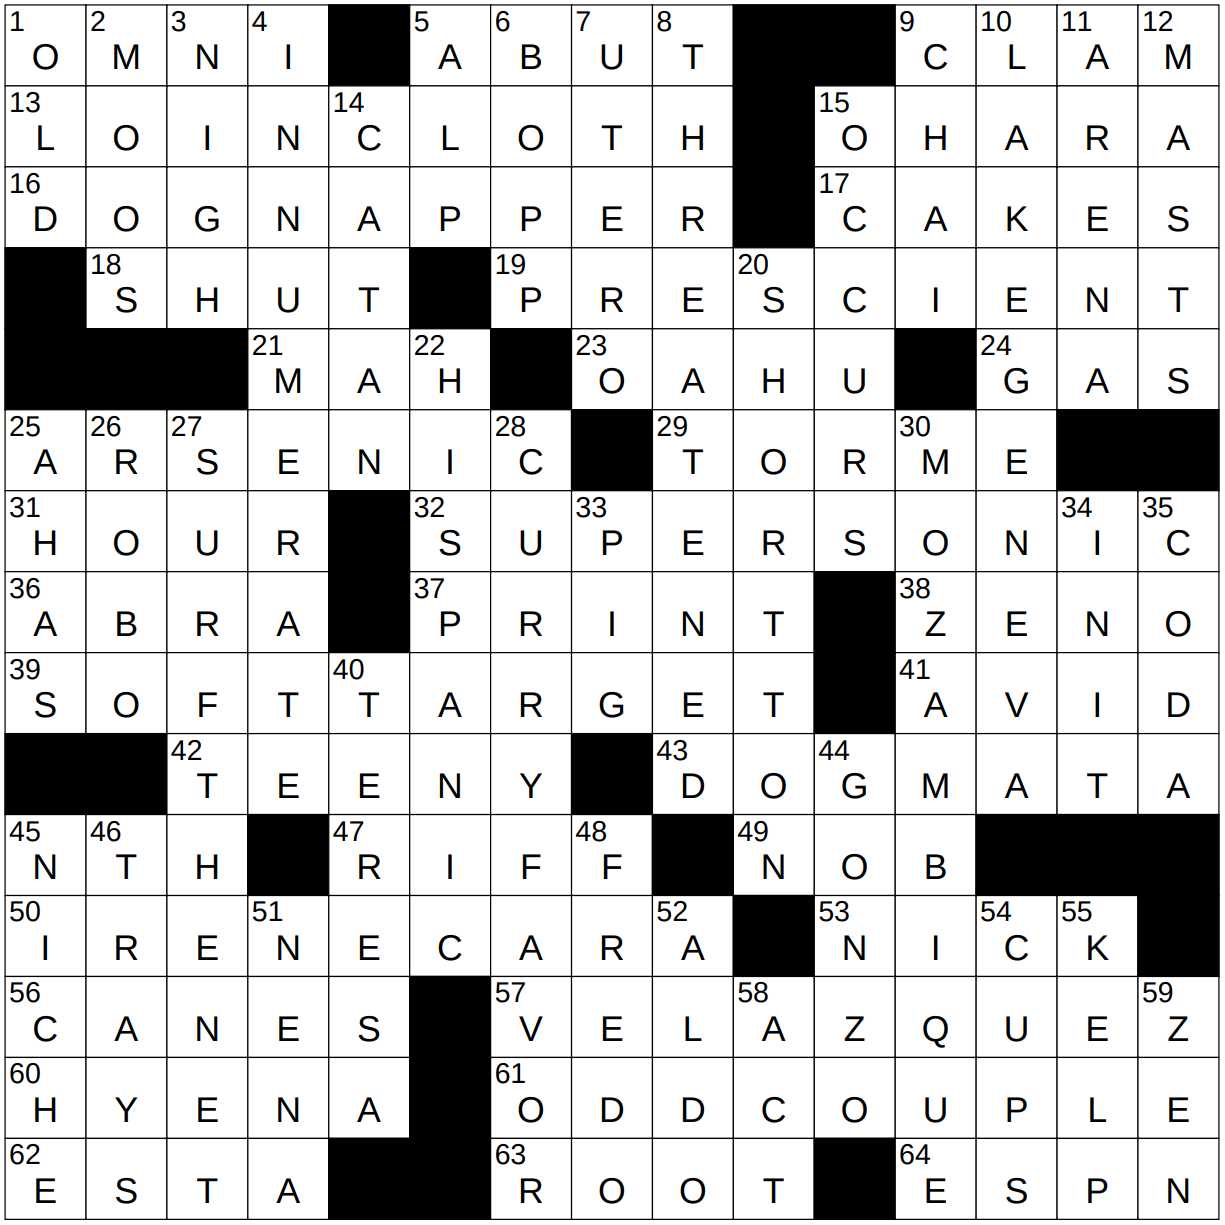 A Thrilling Adventure: Solving Likely Crossword Clues